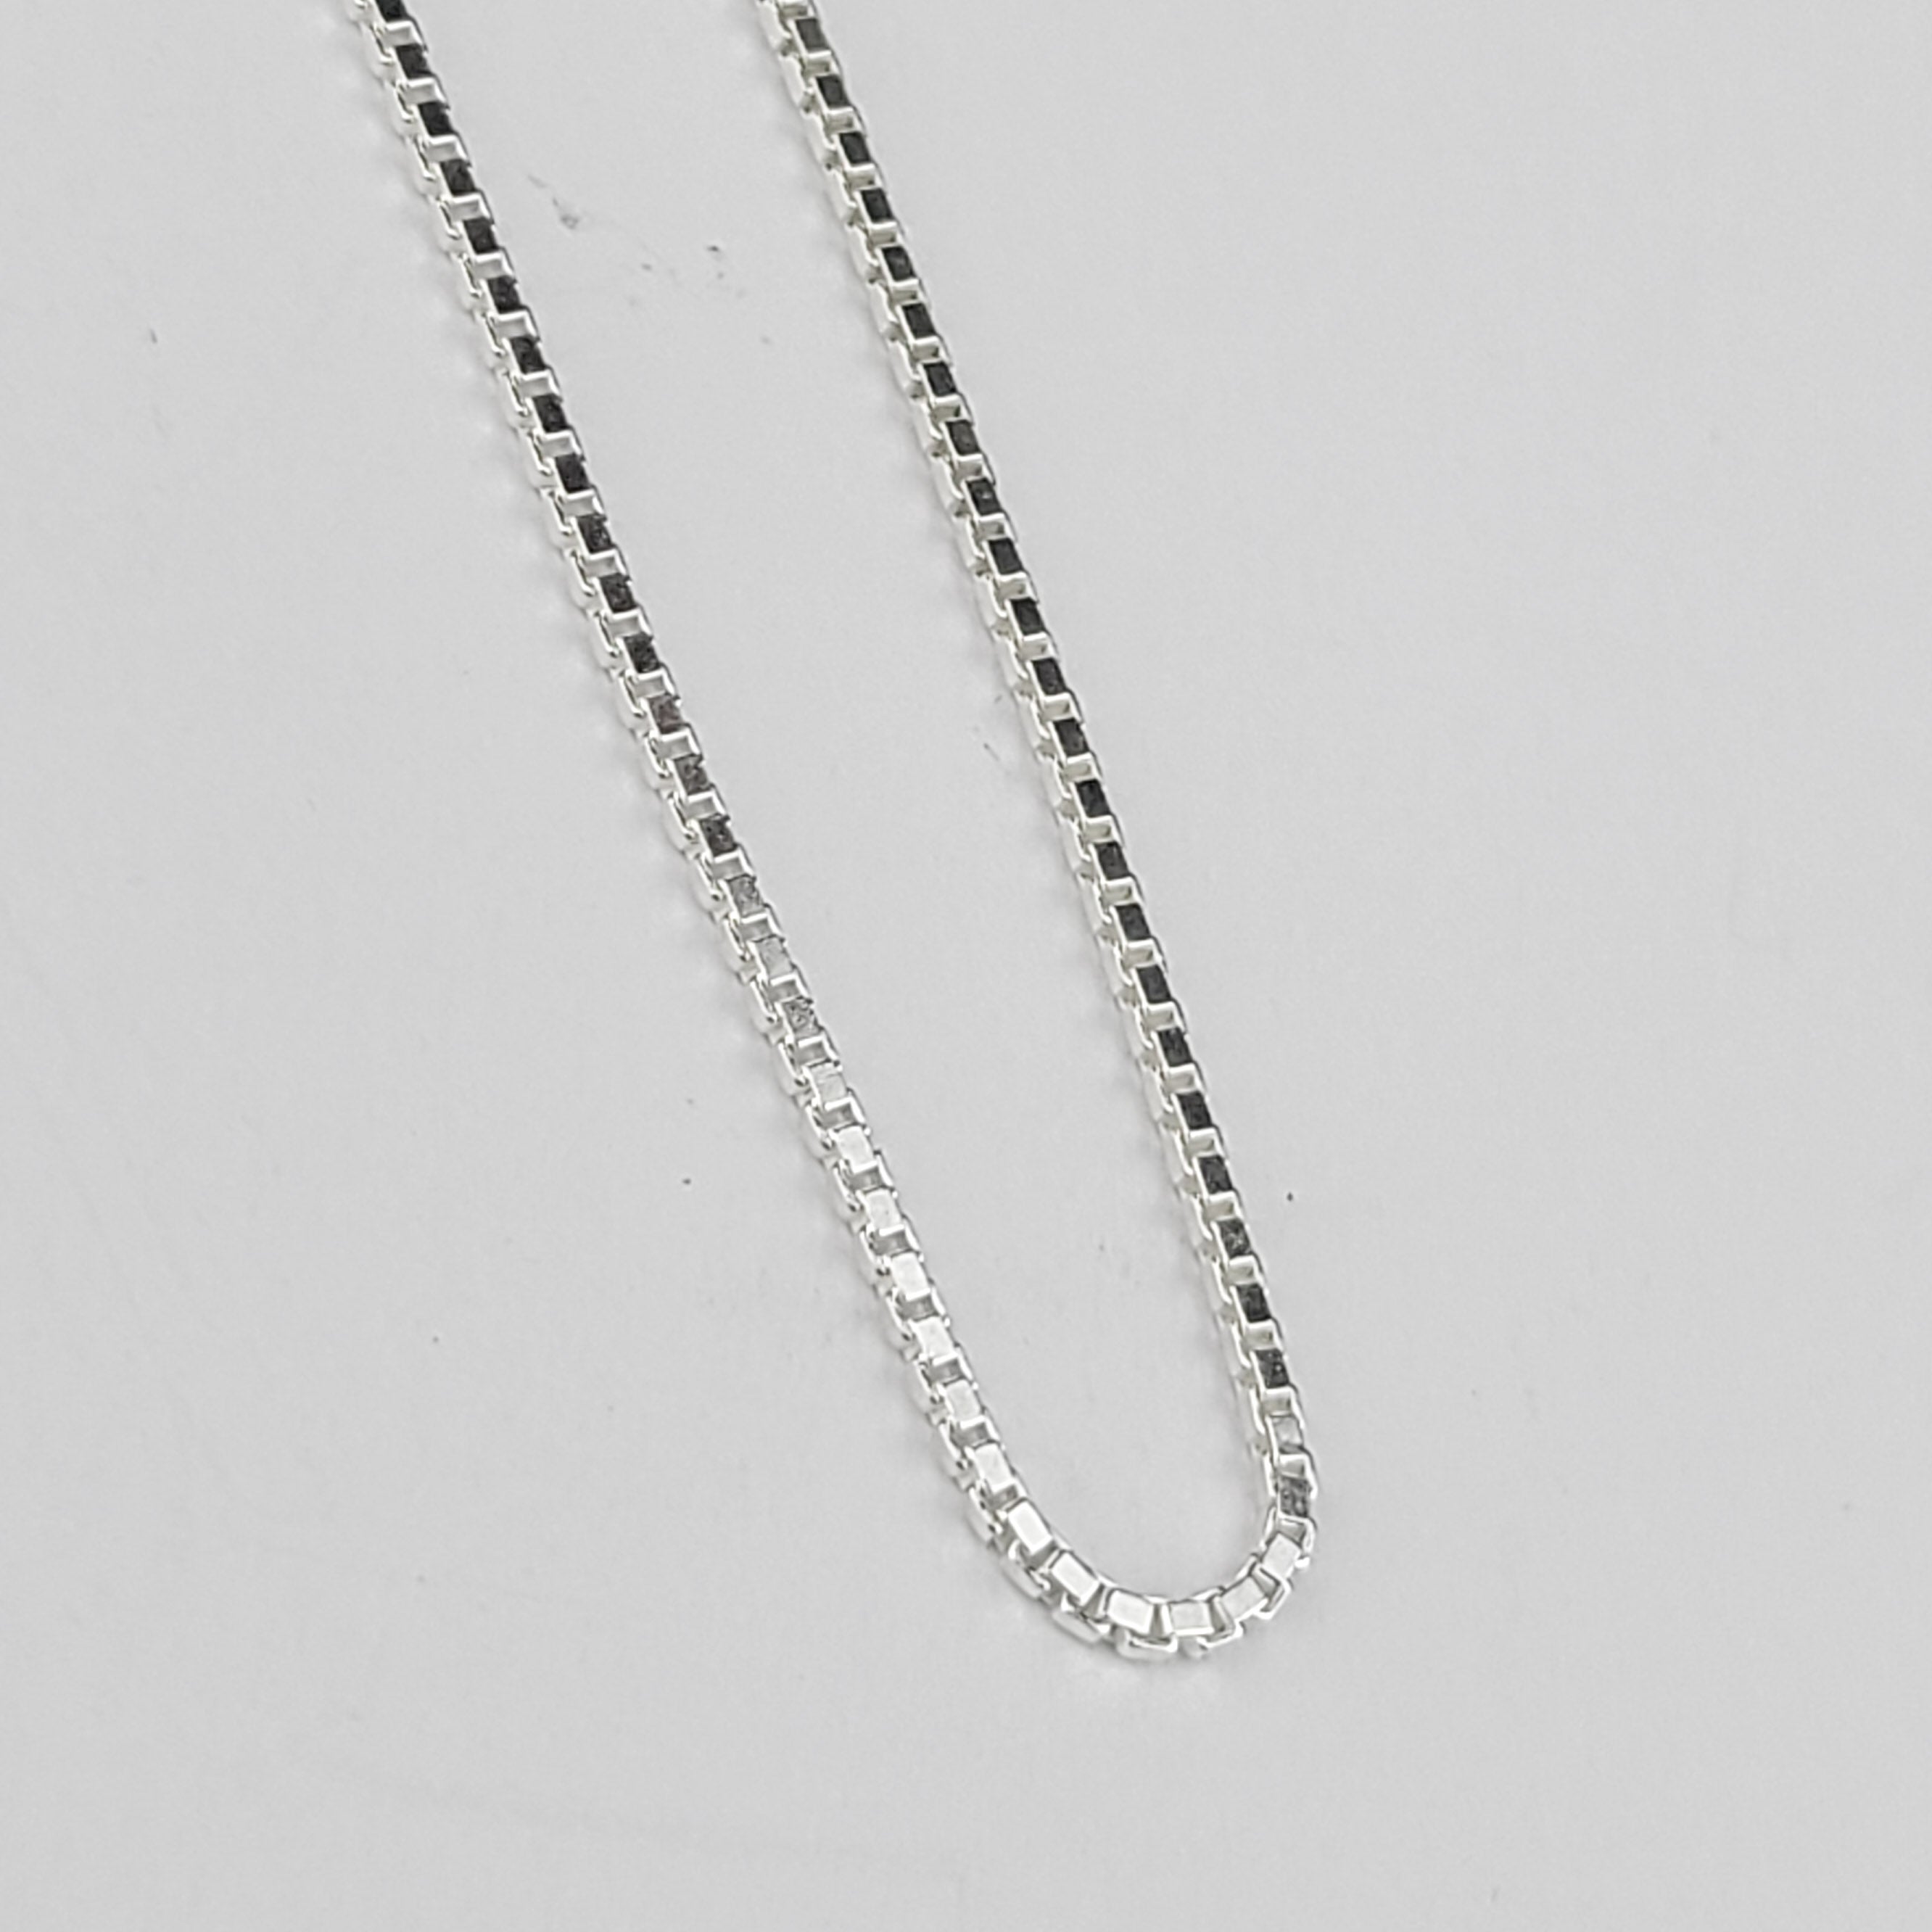 925 Sterling Silver 1mm Singapore Chain Necklace, 16” to 30”, with Ring  Clasp, for Women, Girls, Unisex - Walmart.com